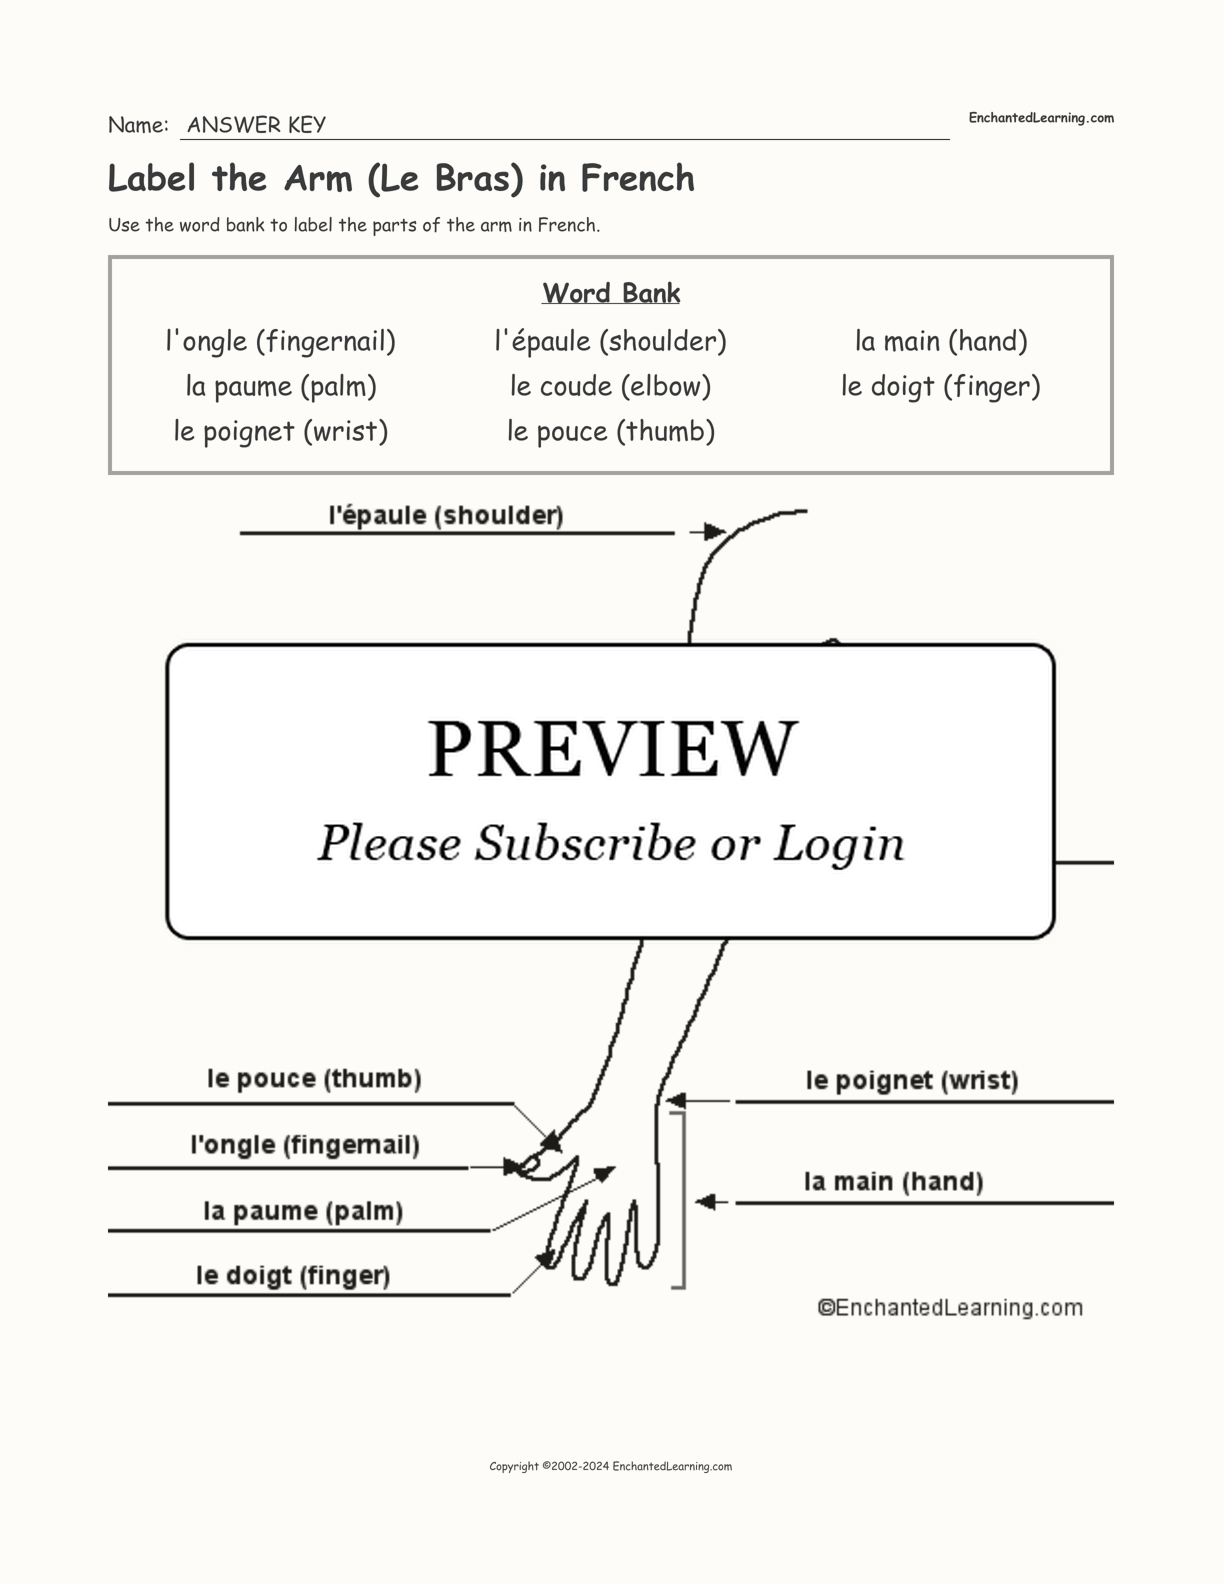 Label the Arm (Le Bras) in French interactive worksheet page 2